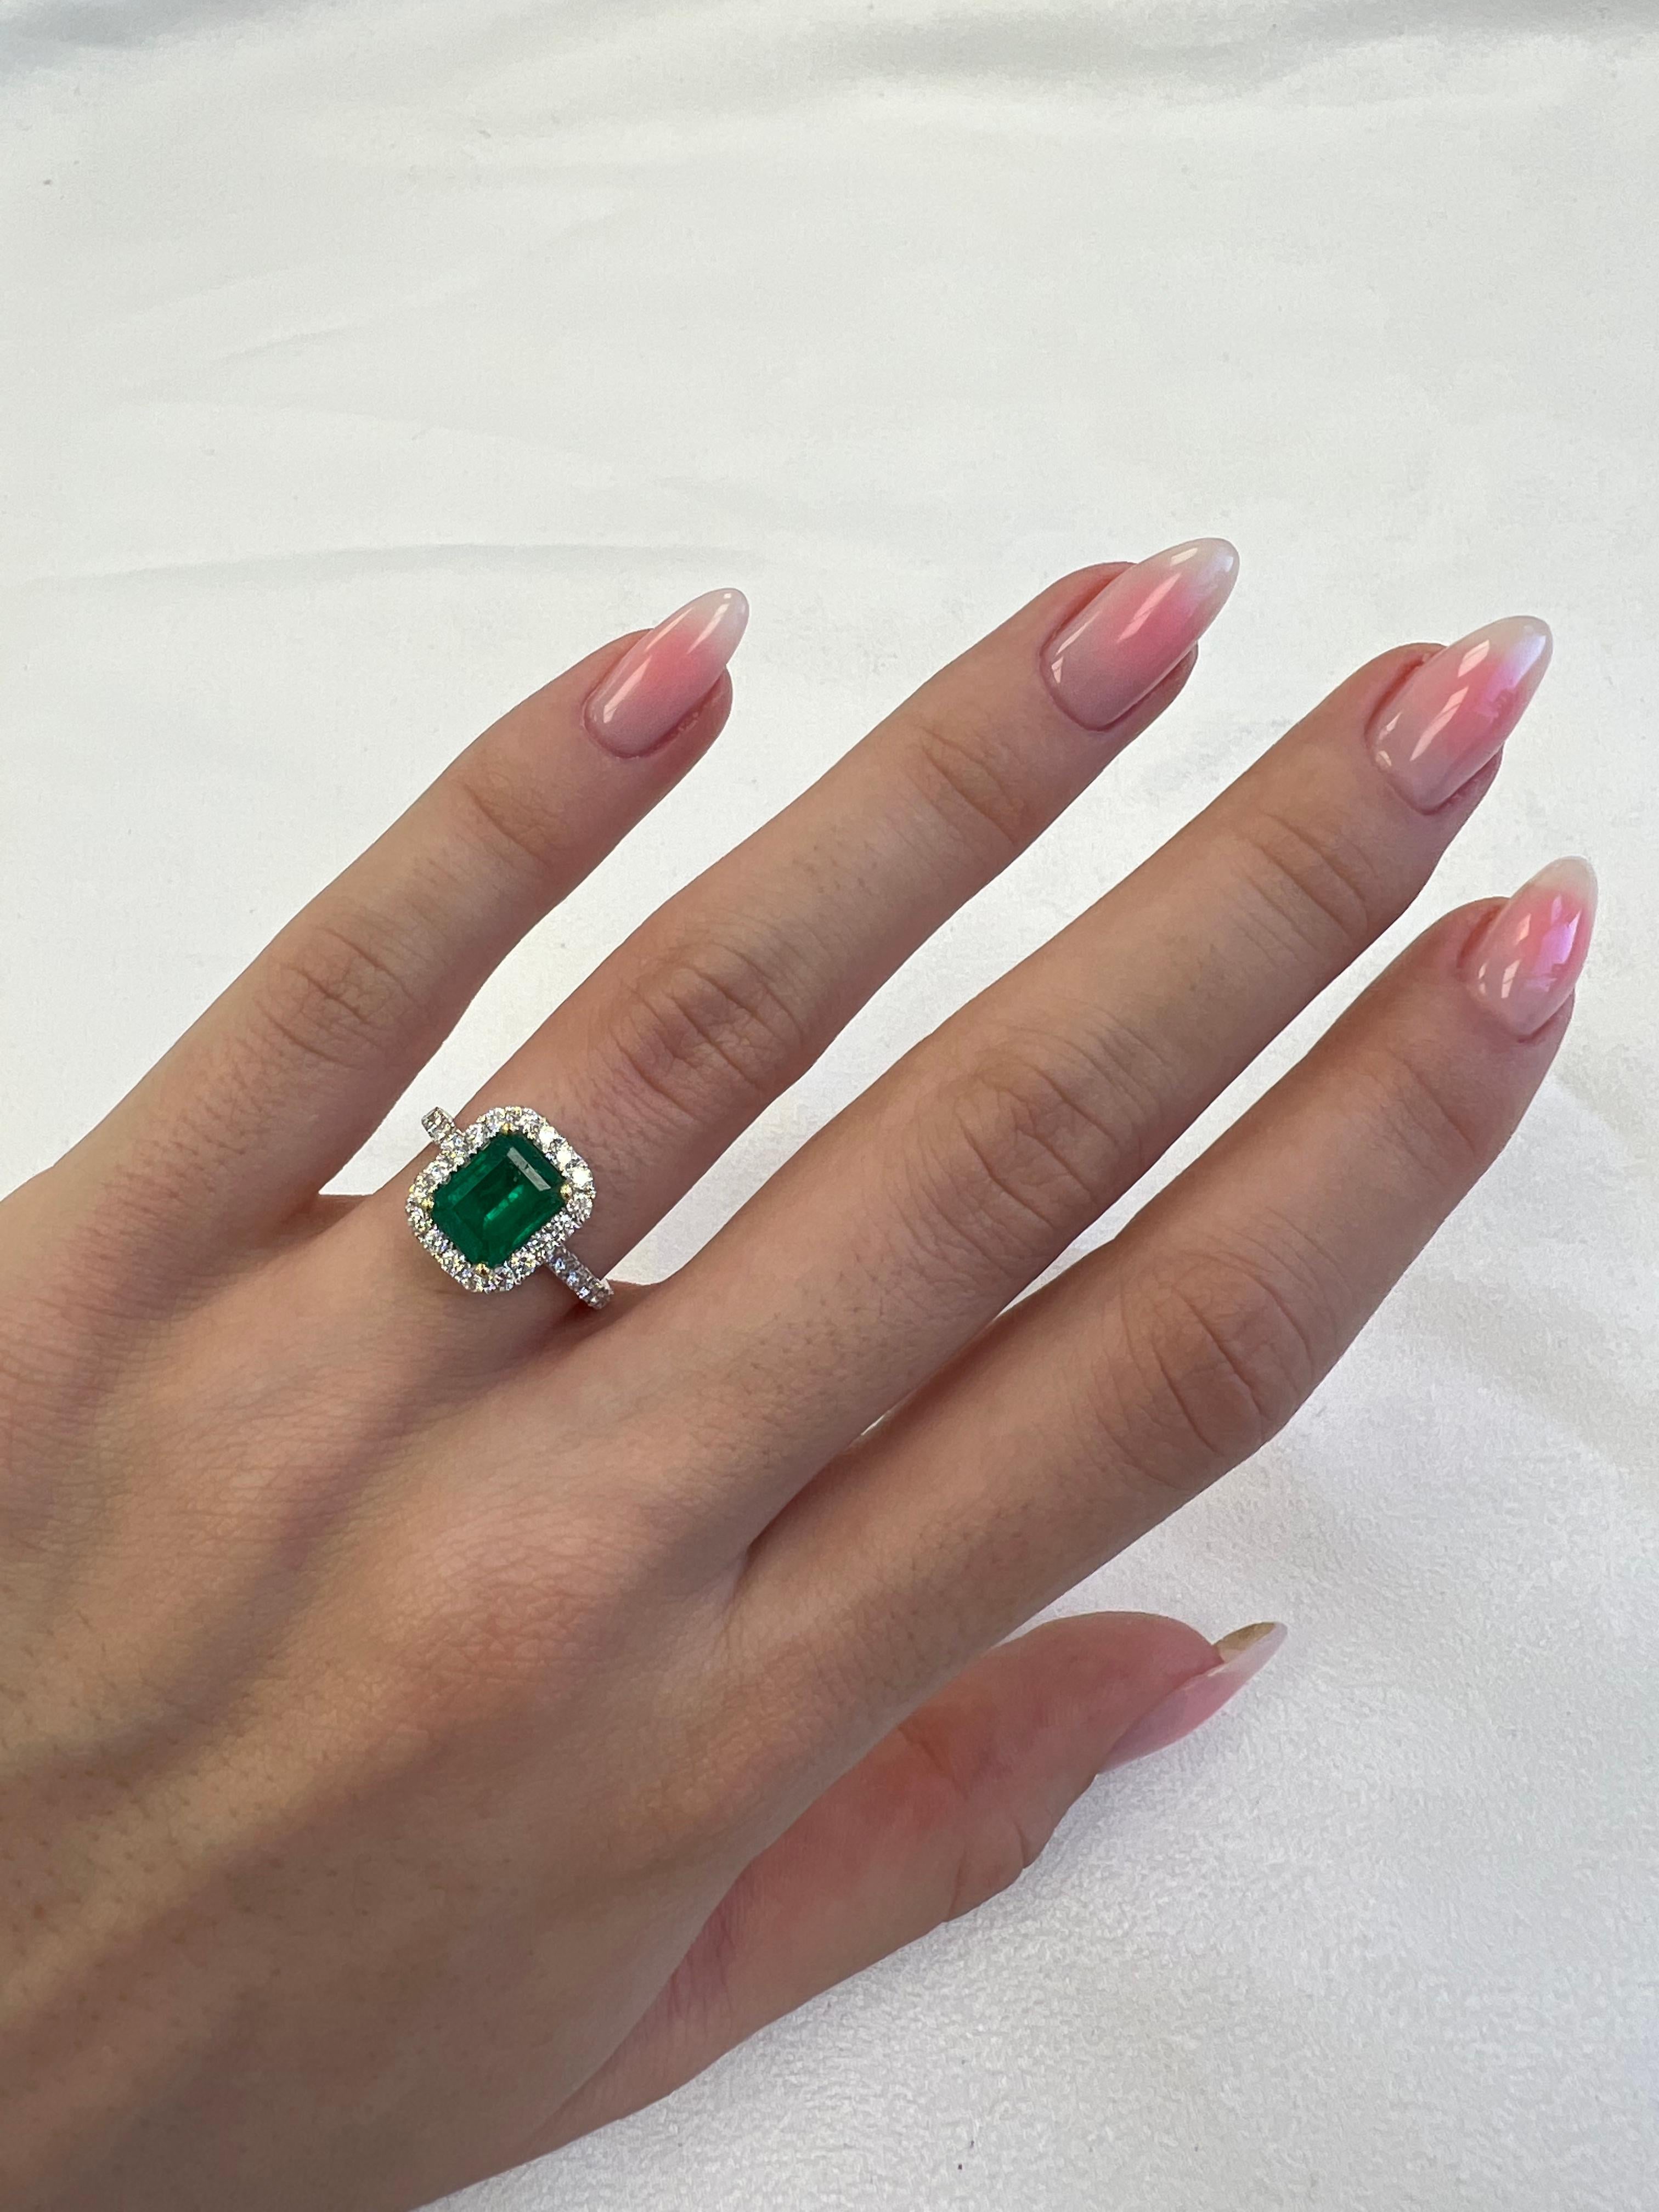 Classic emerald and diamond halo ring, GIA certified. 
2.42 carats total gemstone weight.
1.71 carat emerald cut emerald, F2, GIA certified. Complimented by 30 round brilliant diamonds, 0.71 carats, F/G color and VS clarity. 18k white and yellow